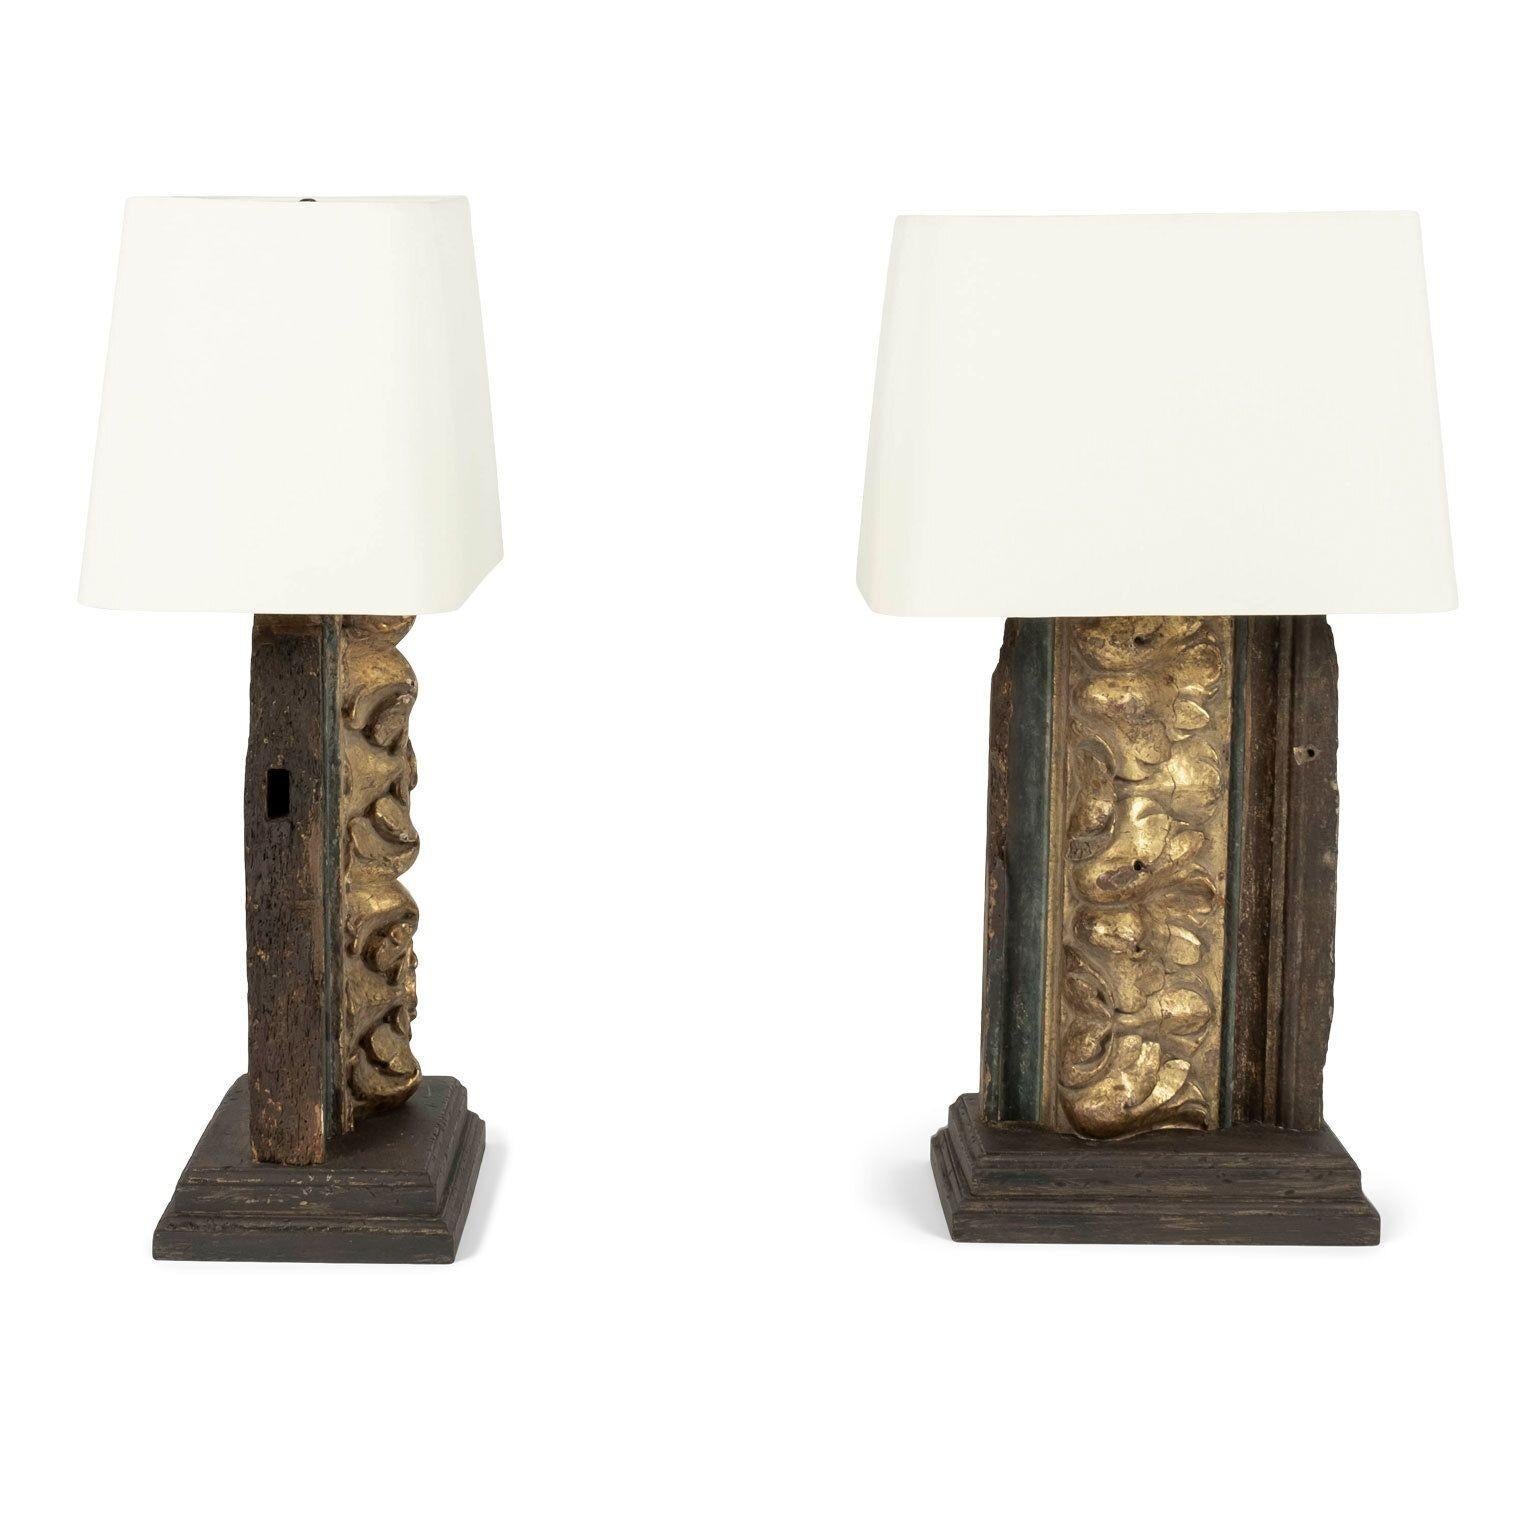 Contemporary Pair of Giltwood Architectural Fragment Lamps For Sale